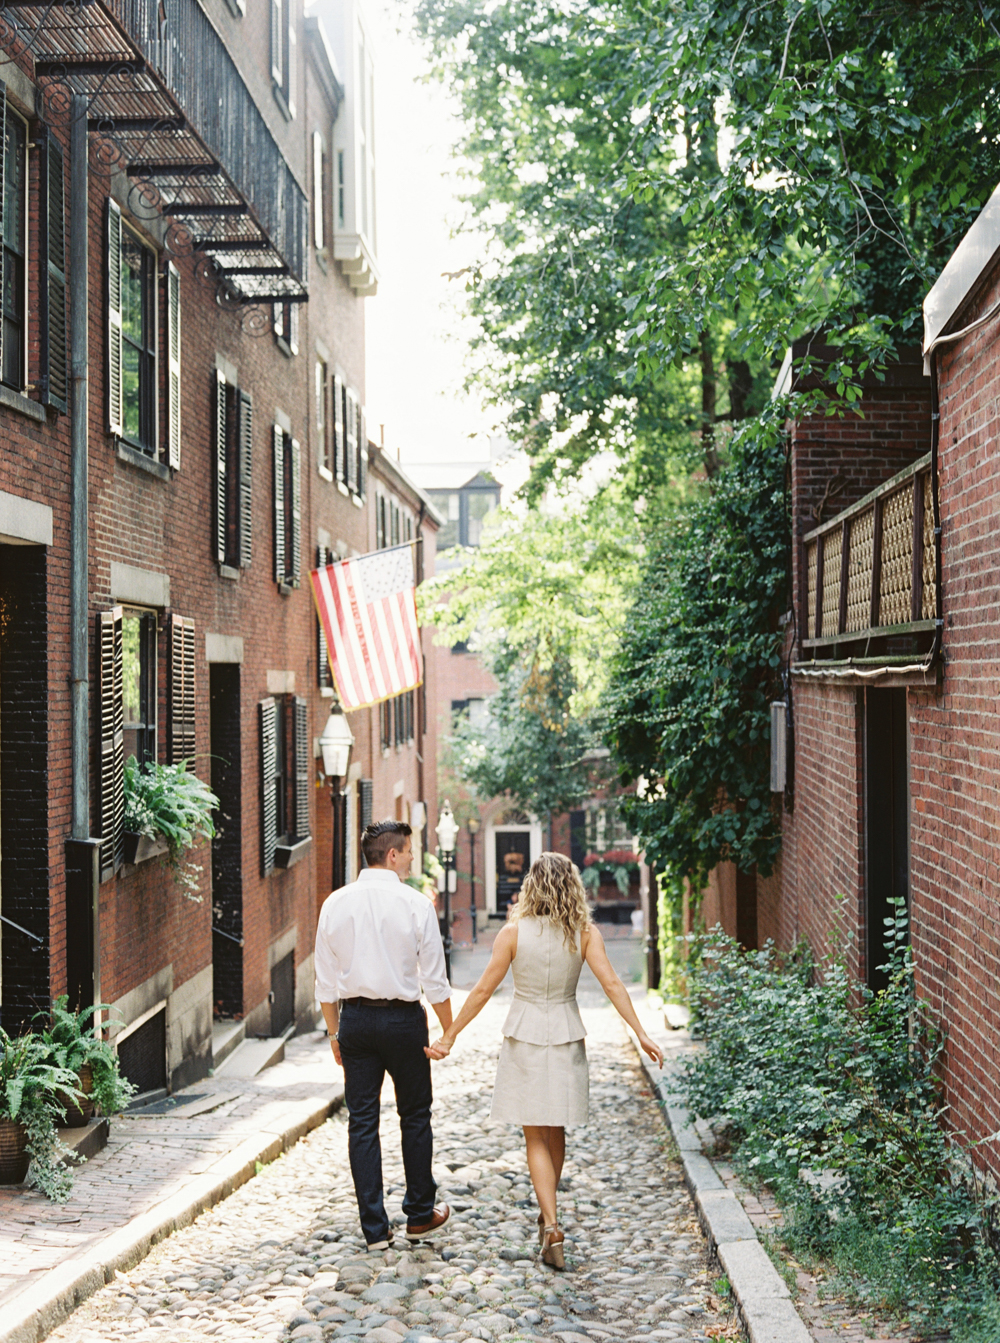 Cobblestone streets of Boston Common perfect for engagement photo shoot